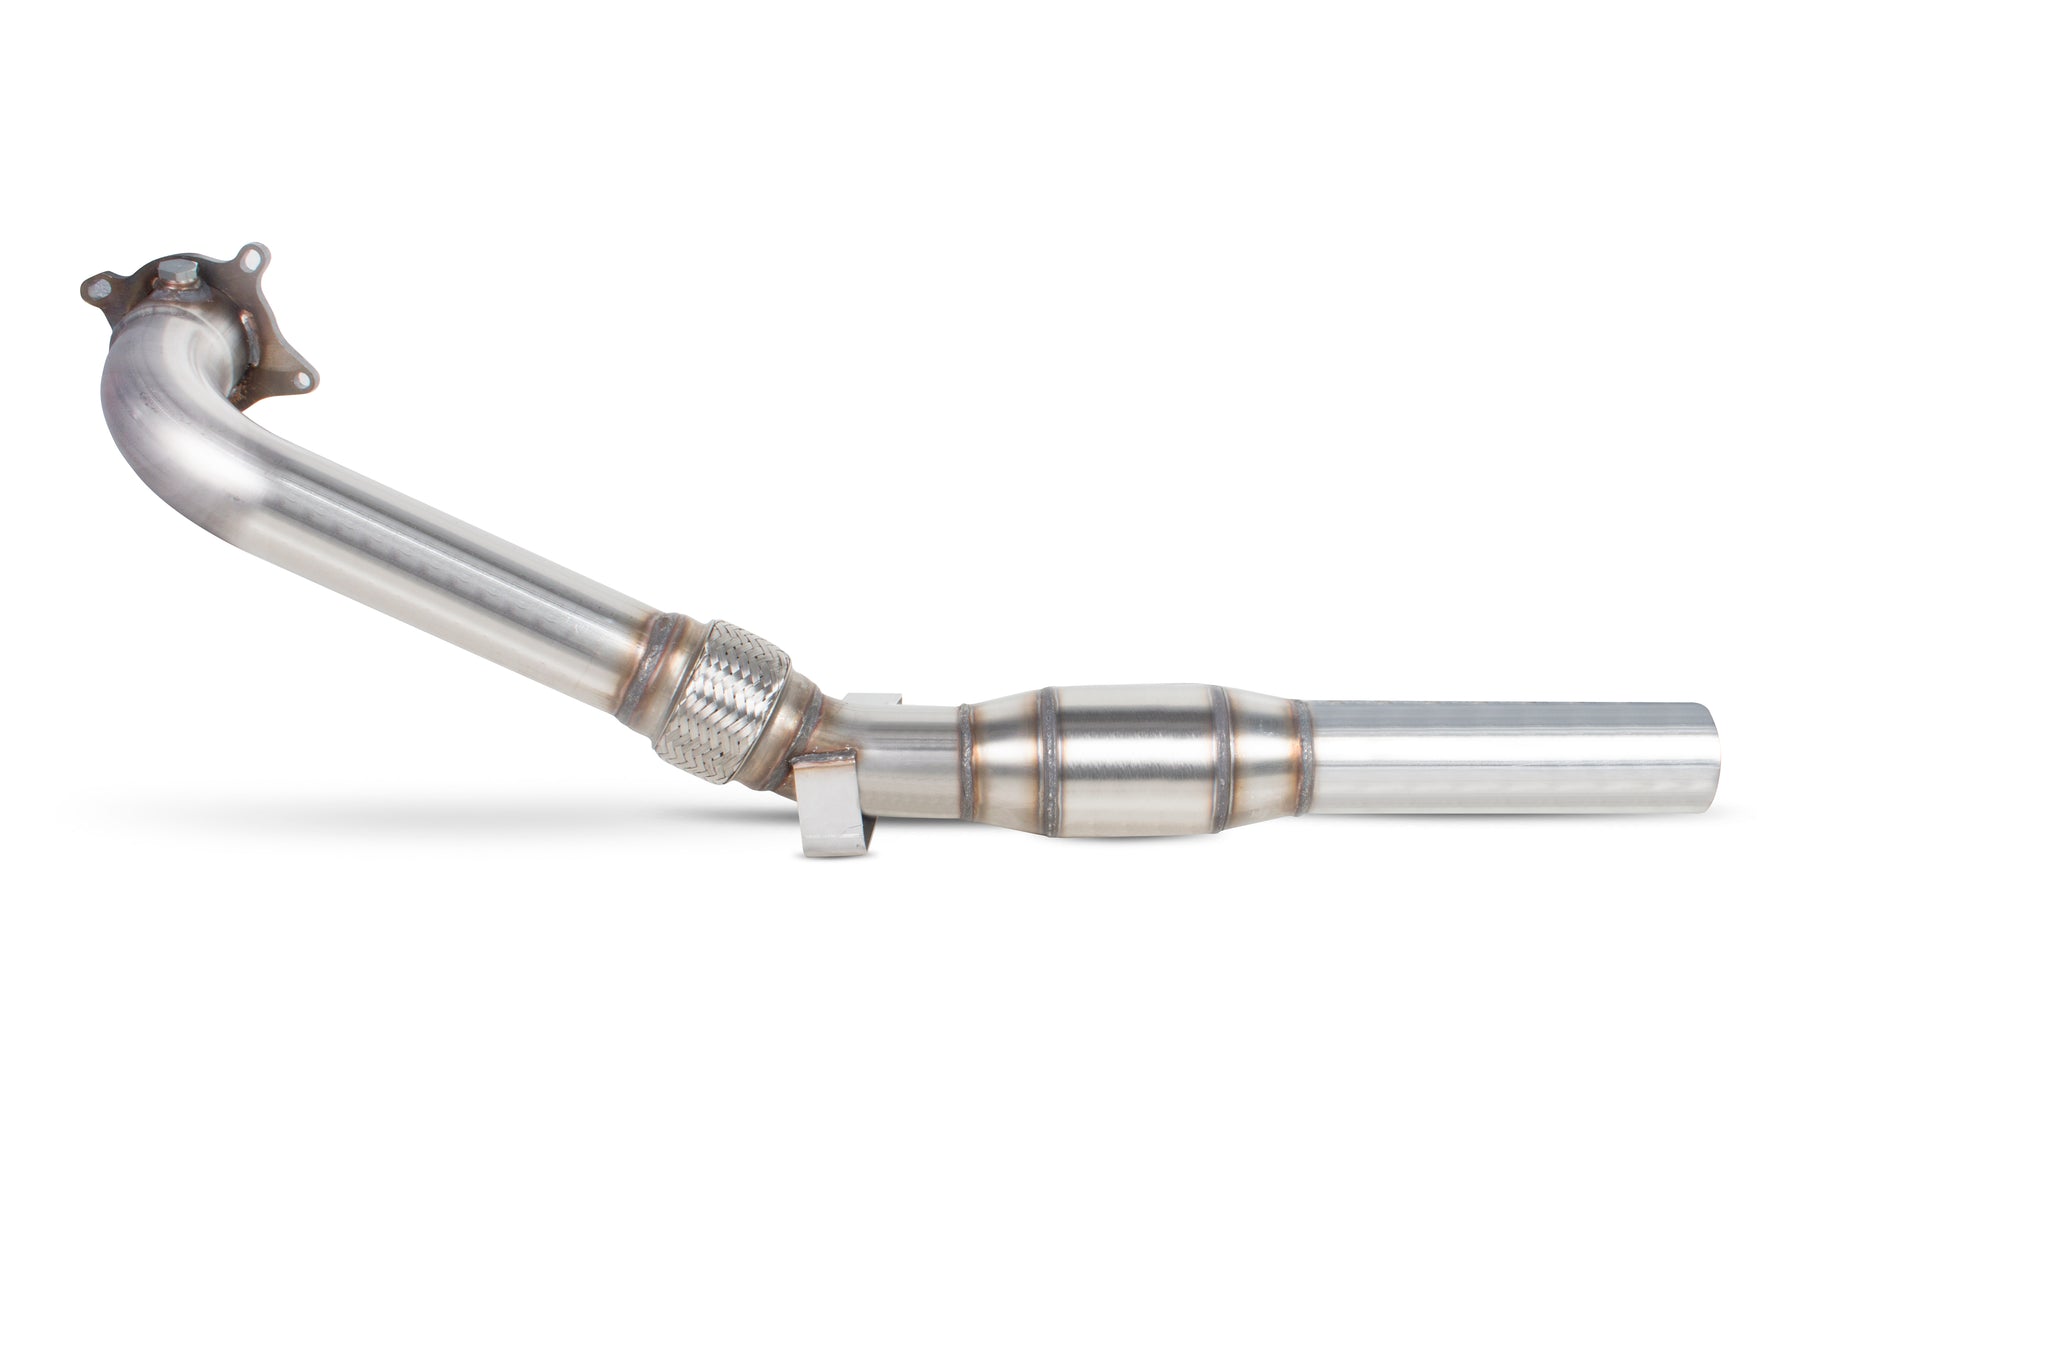 CUPRA R 2.0 TSI 10-12 - SCORPION EXHAUST DOWNPIPE WITH HIGH FLOW SPORTS CATALYST